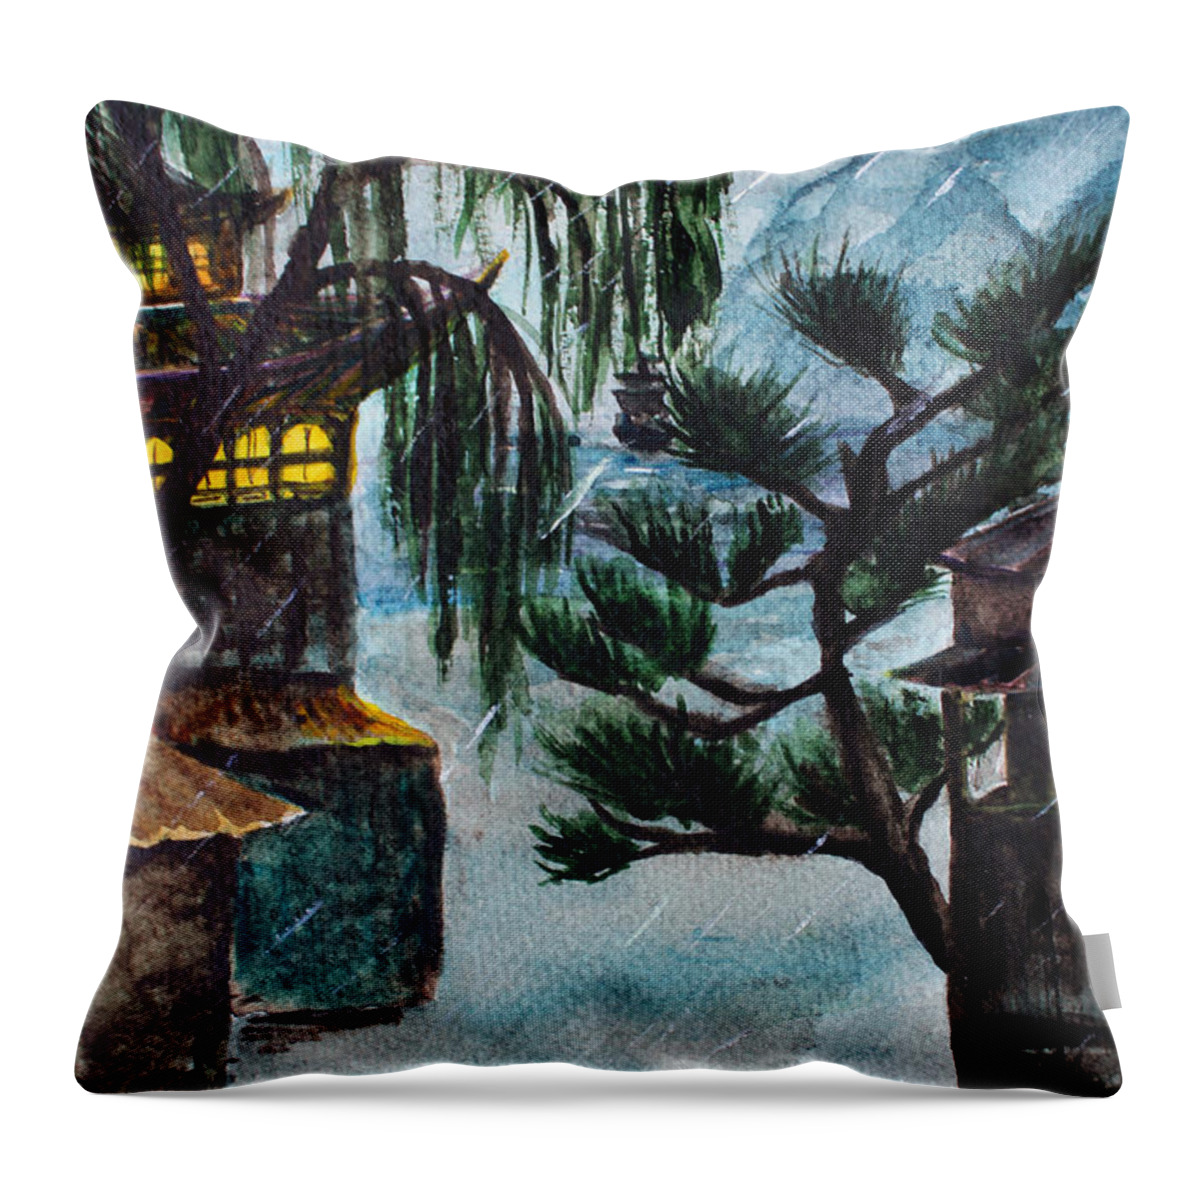 Beautiful Throw Pillow featuring the painting Rainy Evening by Medea Ioseliani